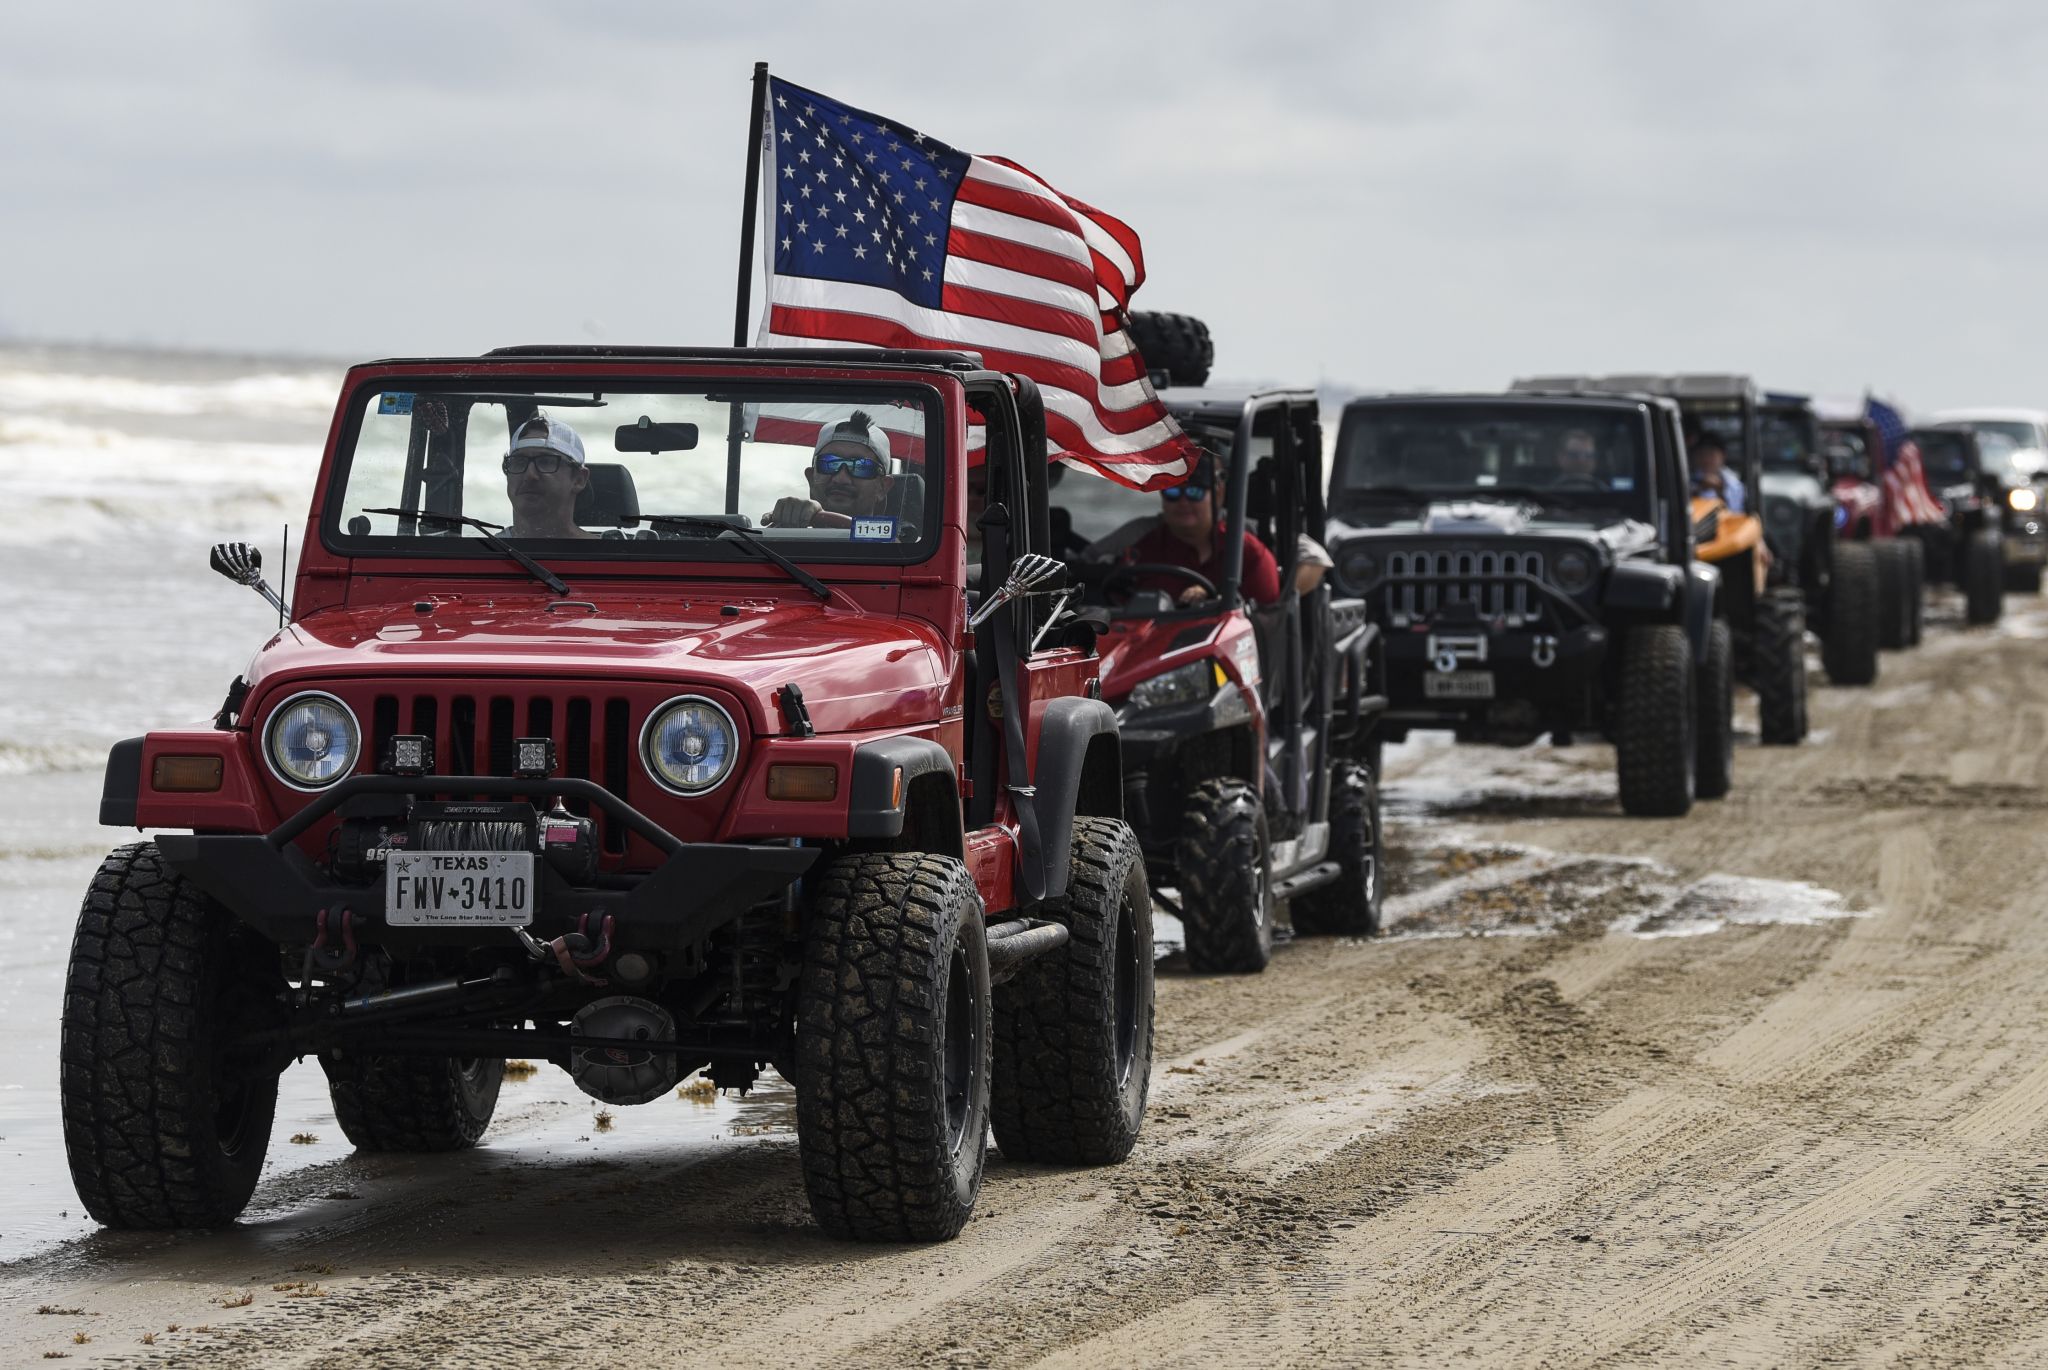 Over 189 People Were Arrested and One Was Killed in Galveston During Jeep Weekend